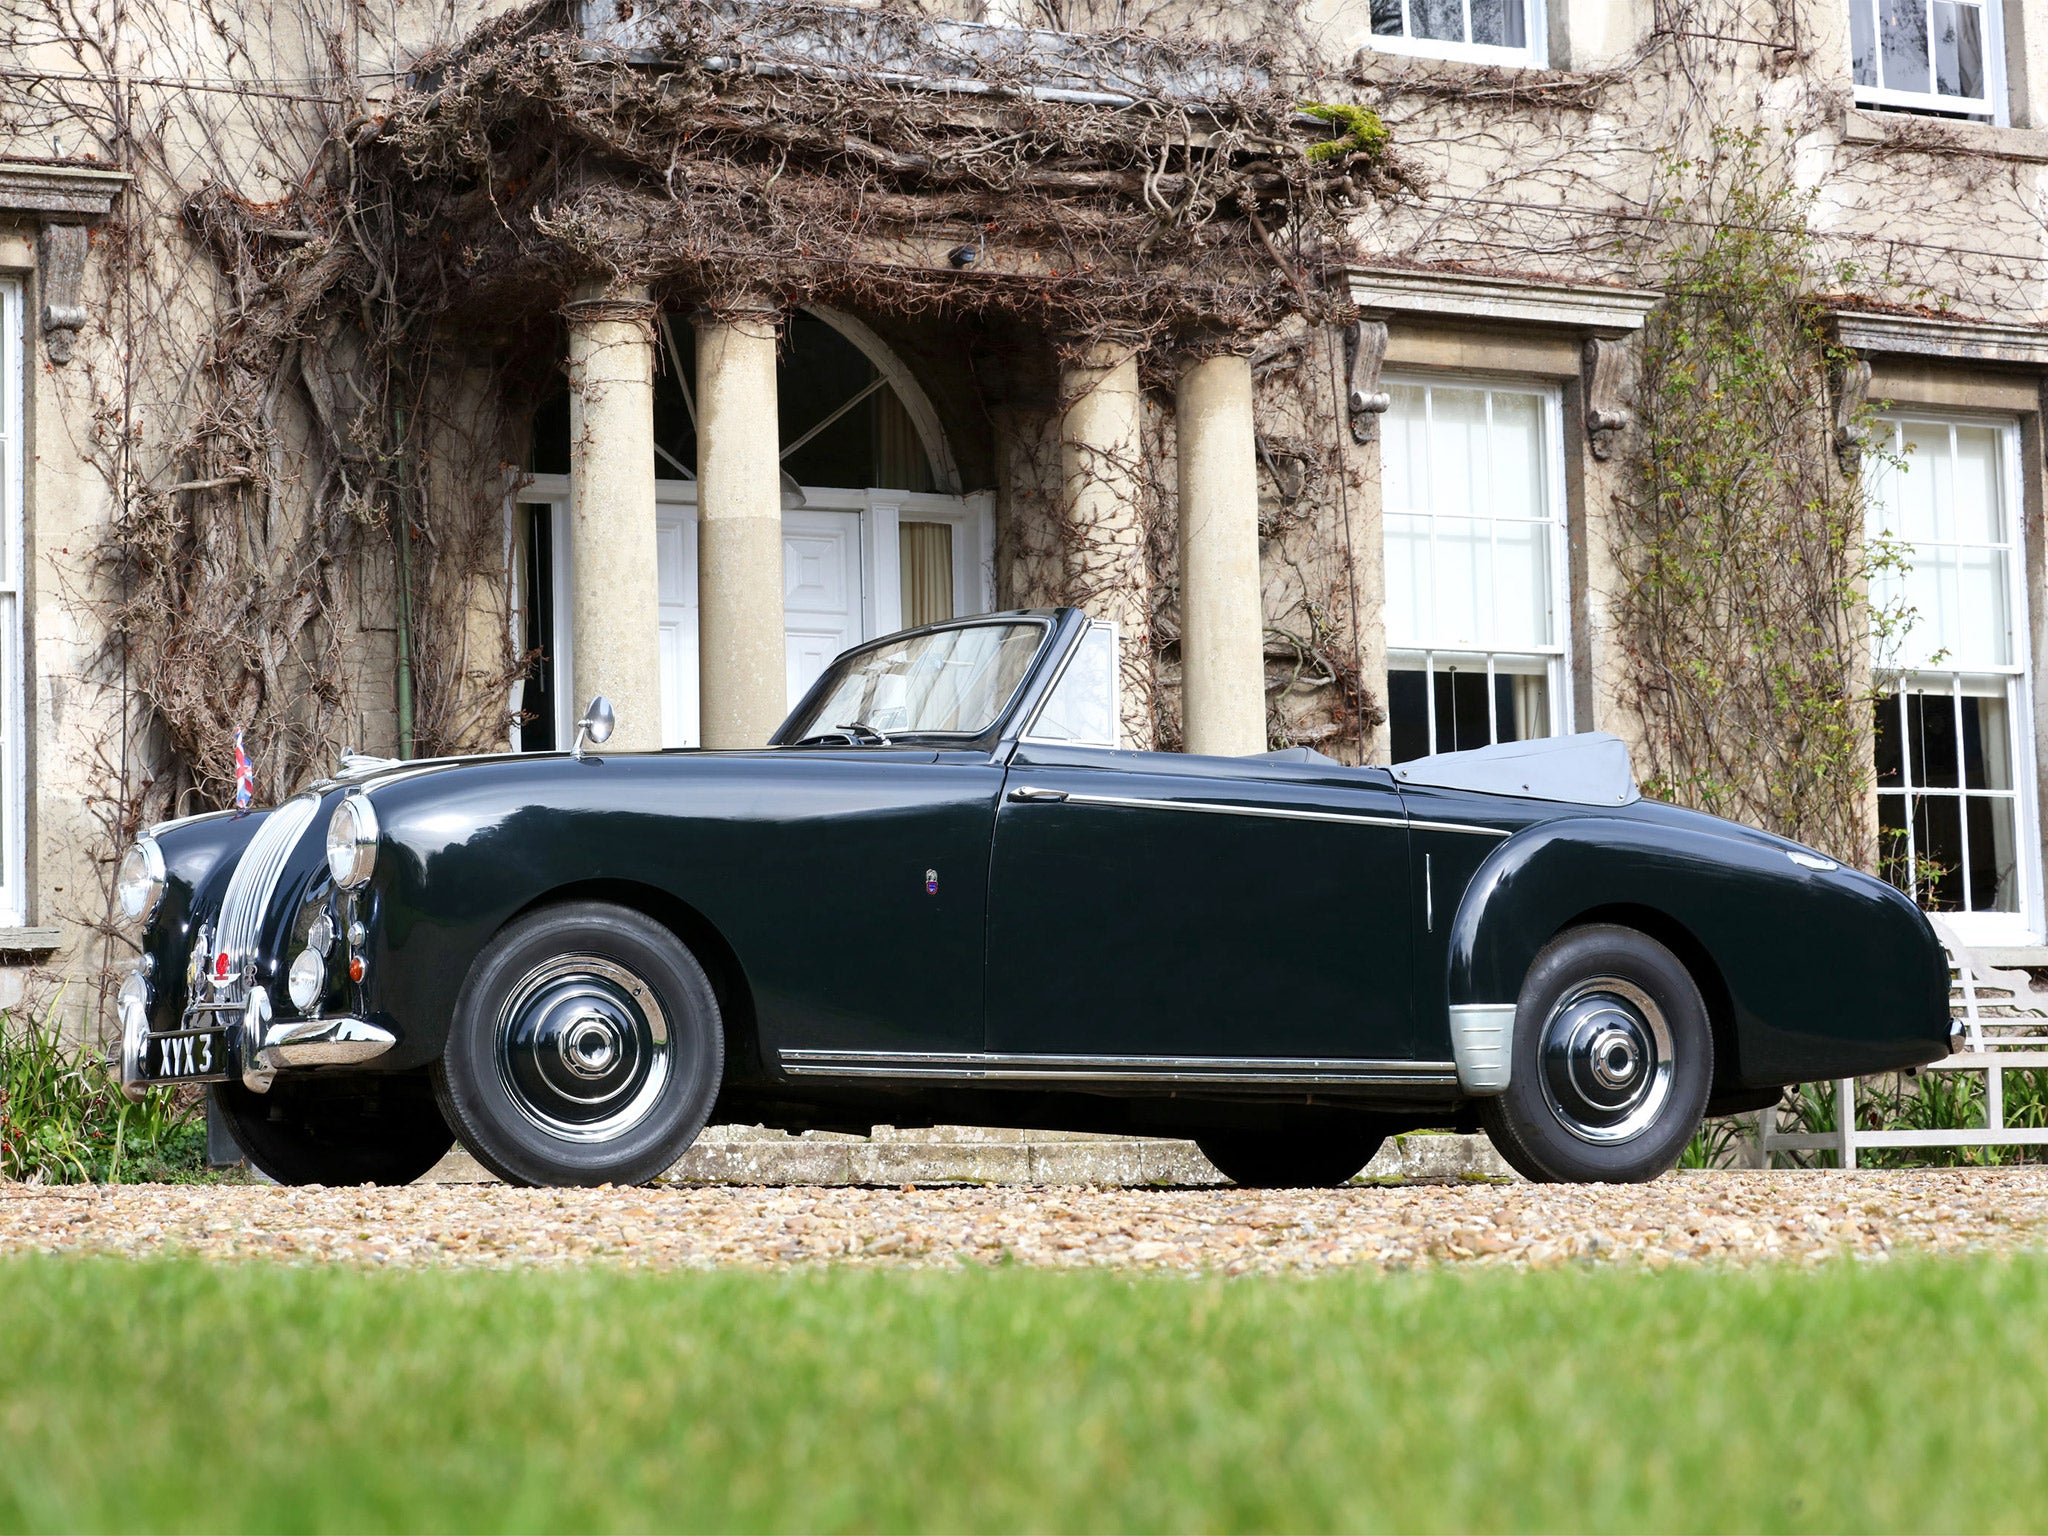 The Aston Martin Lagonda 3 Litre Drophead Coupe, formerly owned by the Duke of Edinburgh, could fetch as much as £450,000